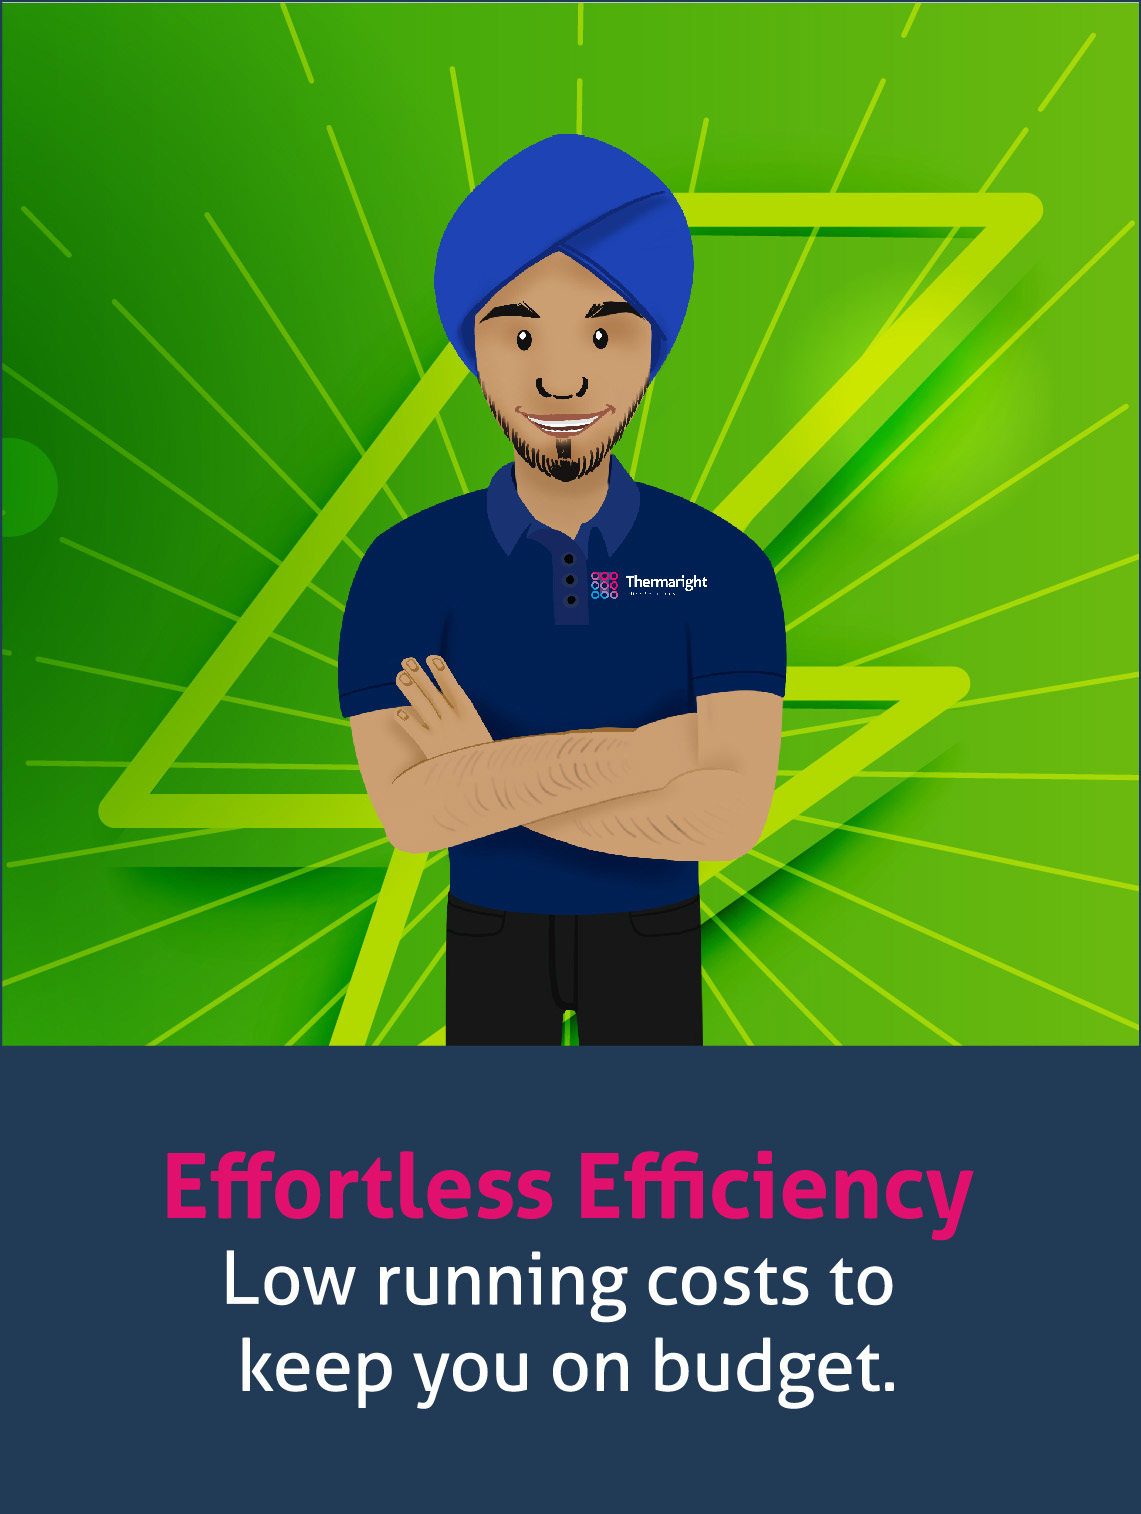 effortless efficienct - low running costs to keep you on budget